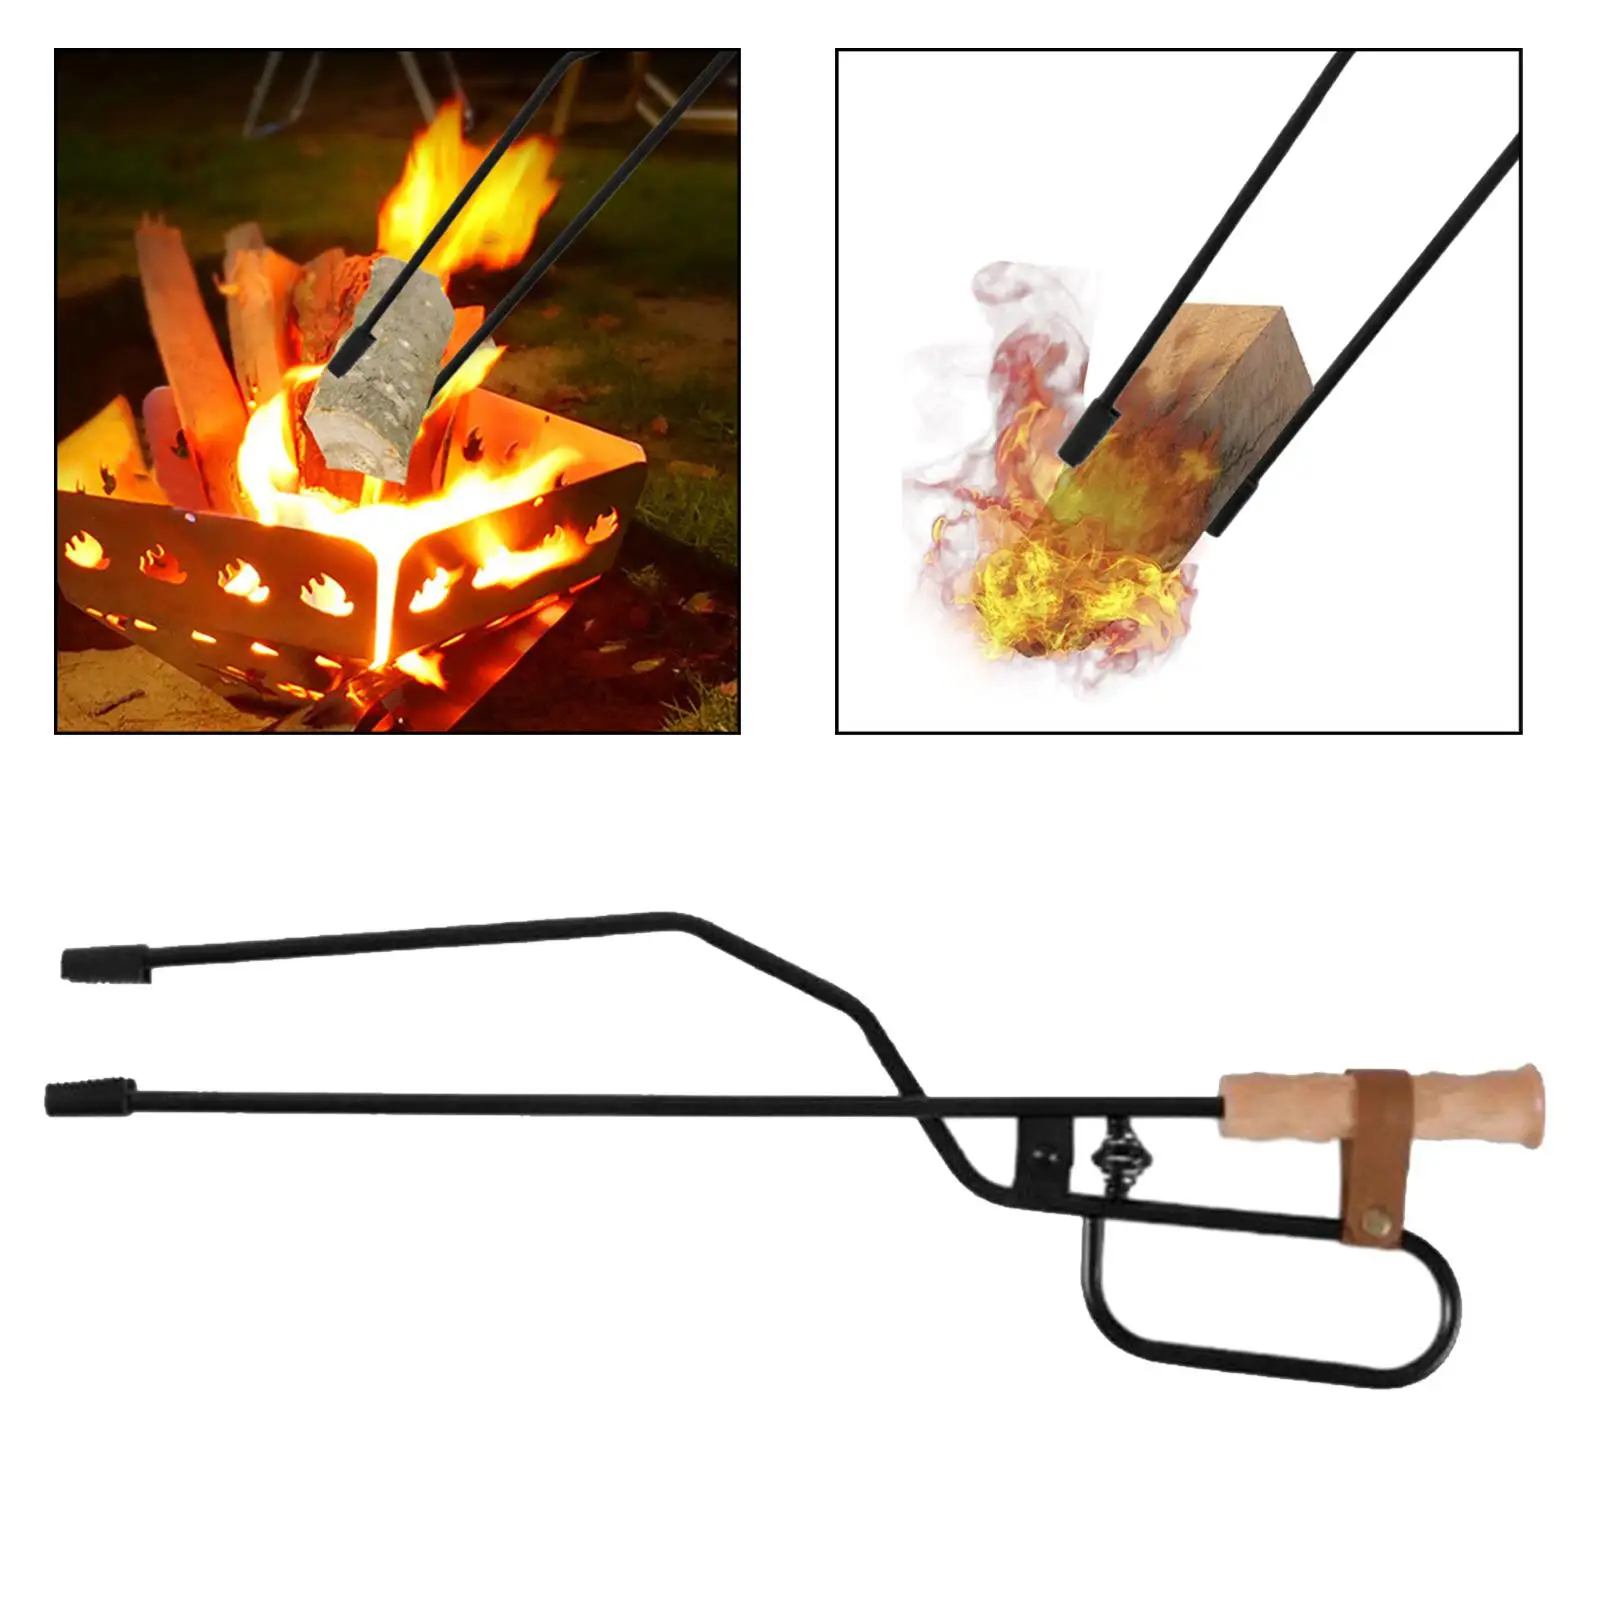 Fireplace Tongs Oven Outdoor Fire Place Stove Firepit Cooking BBQ Coal Tongs